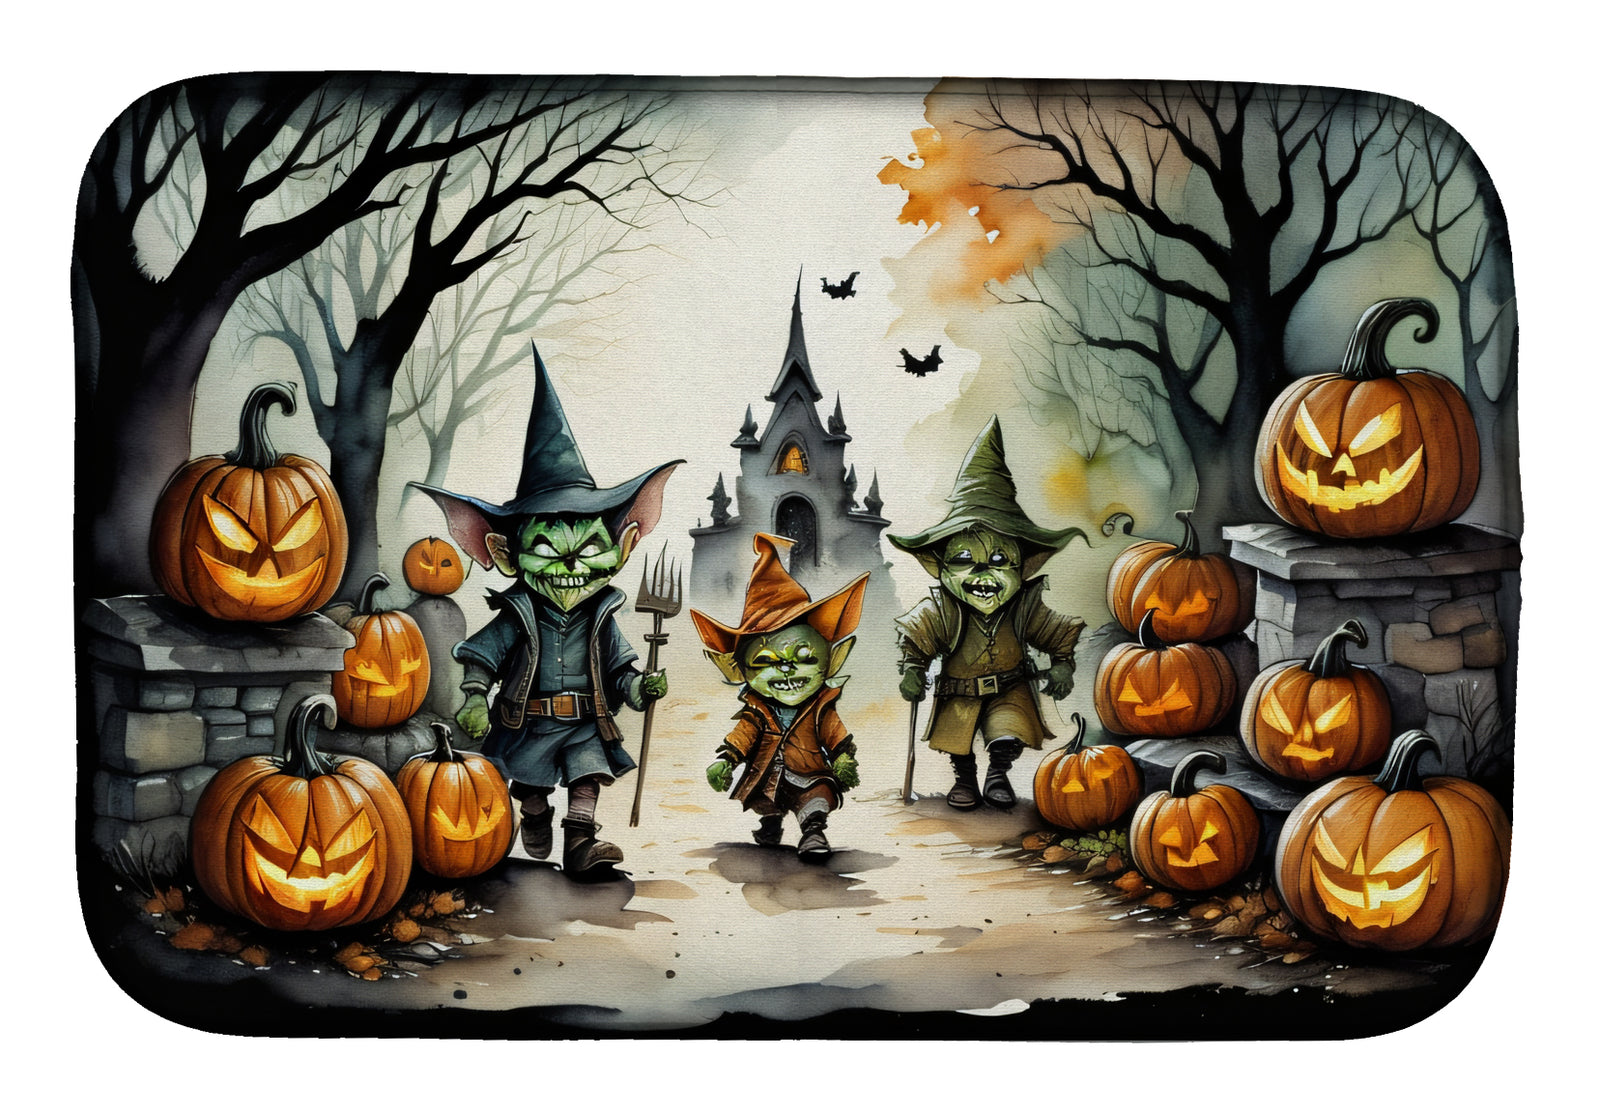 Buy this Goblins Spooky Halloween Dish Drying Mat